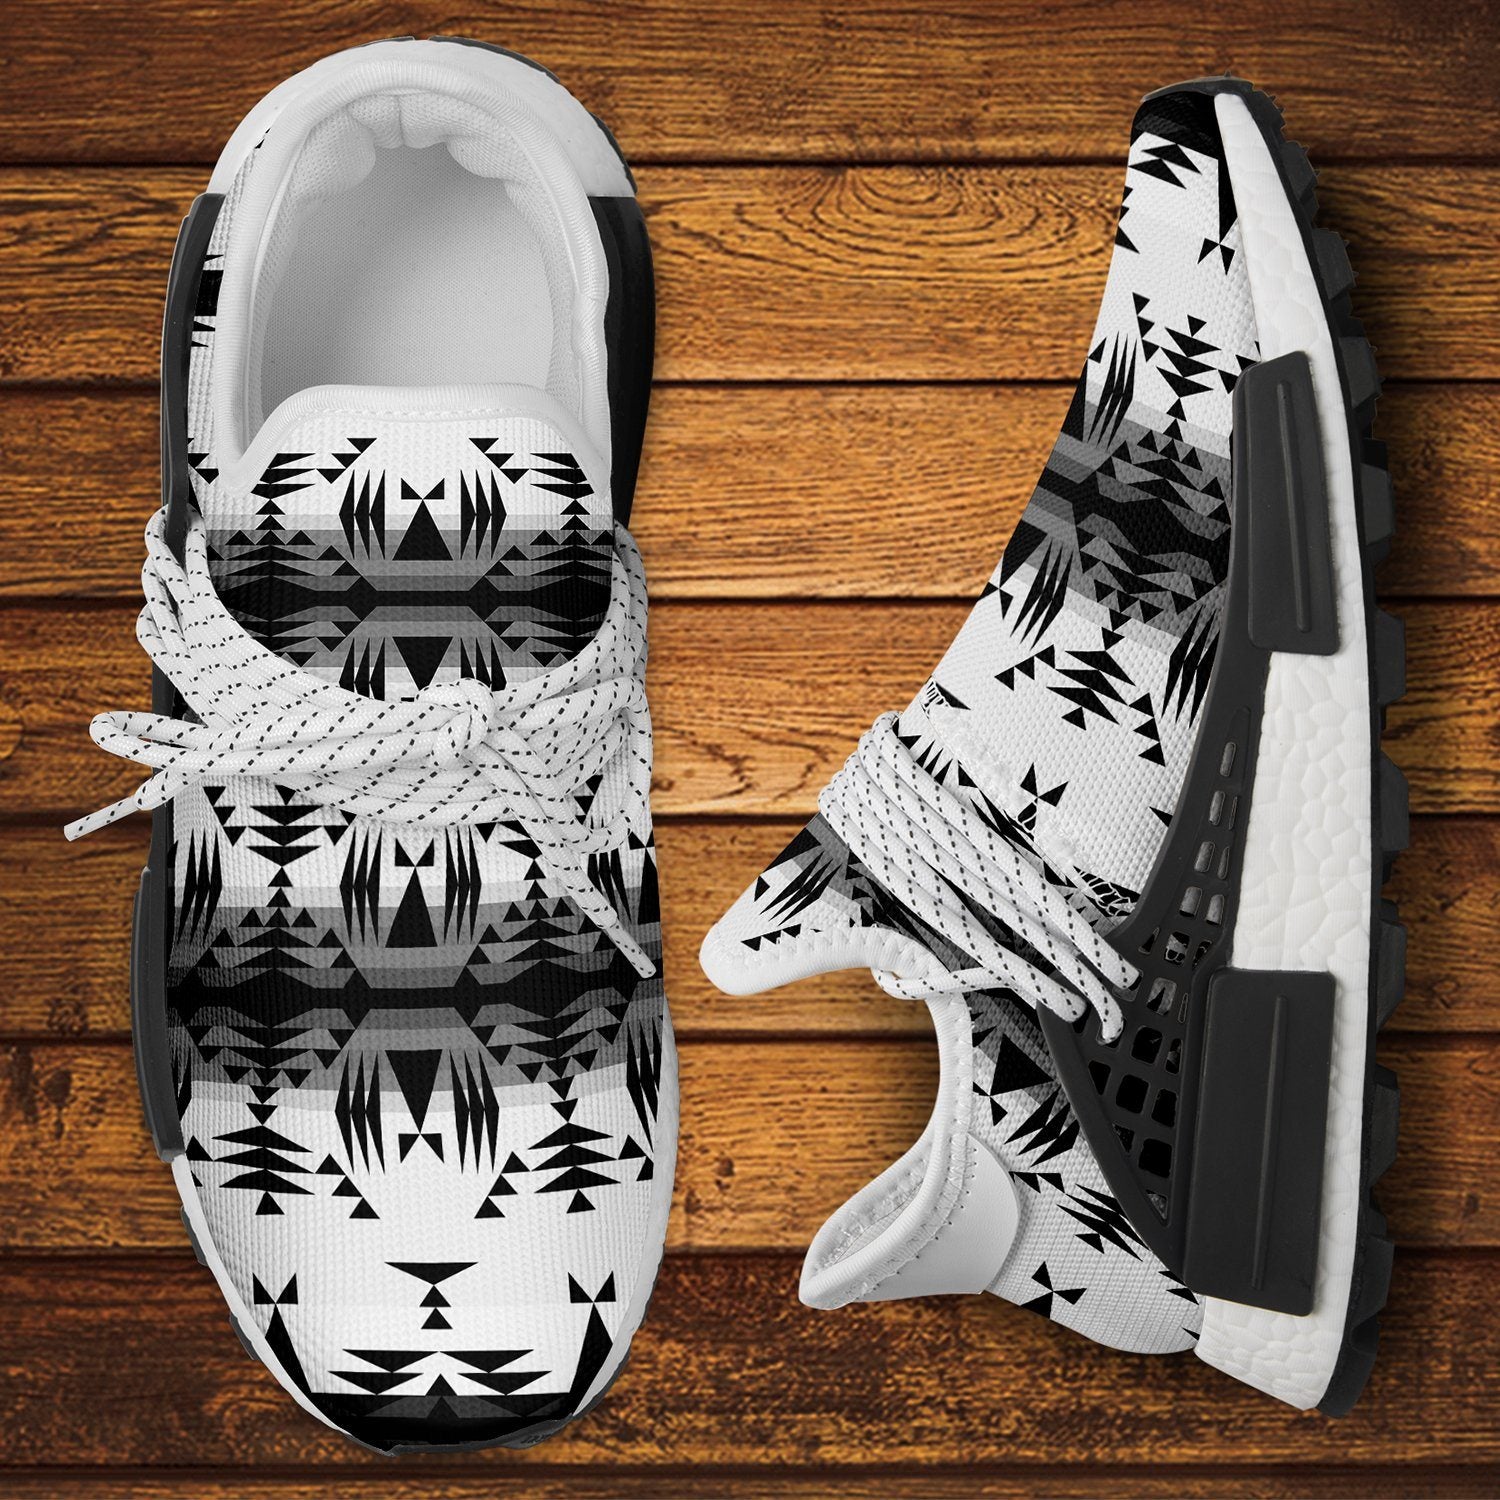 Between the Mountains White and Black Okaki Sneakers Shoes 49 Dzine 